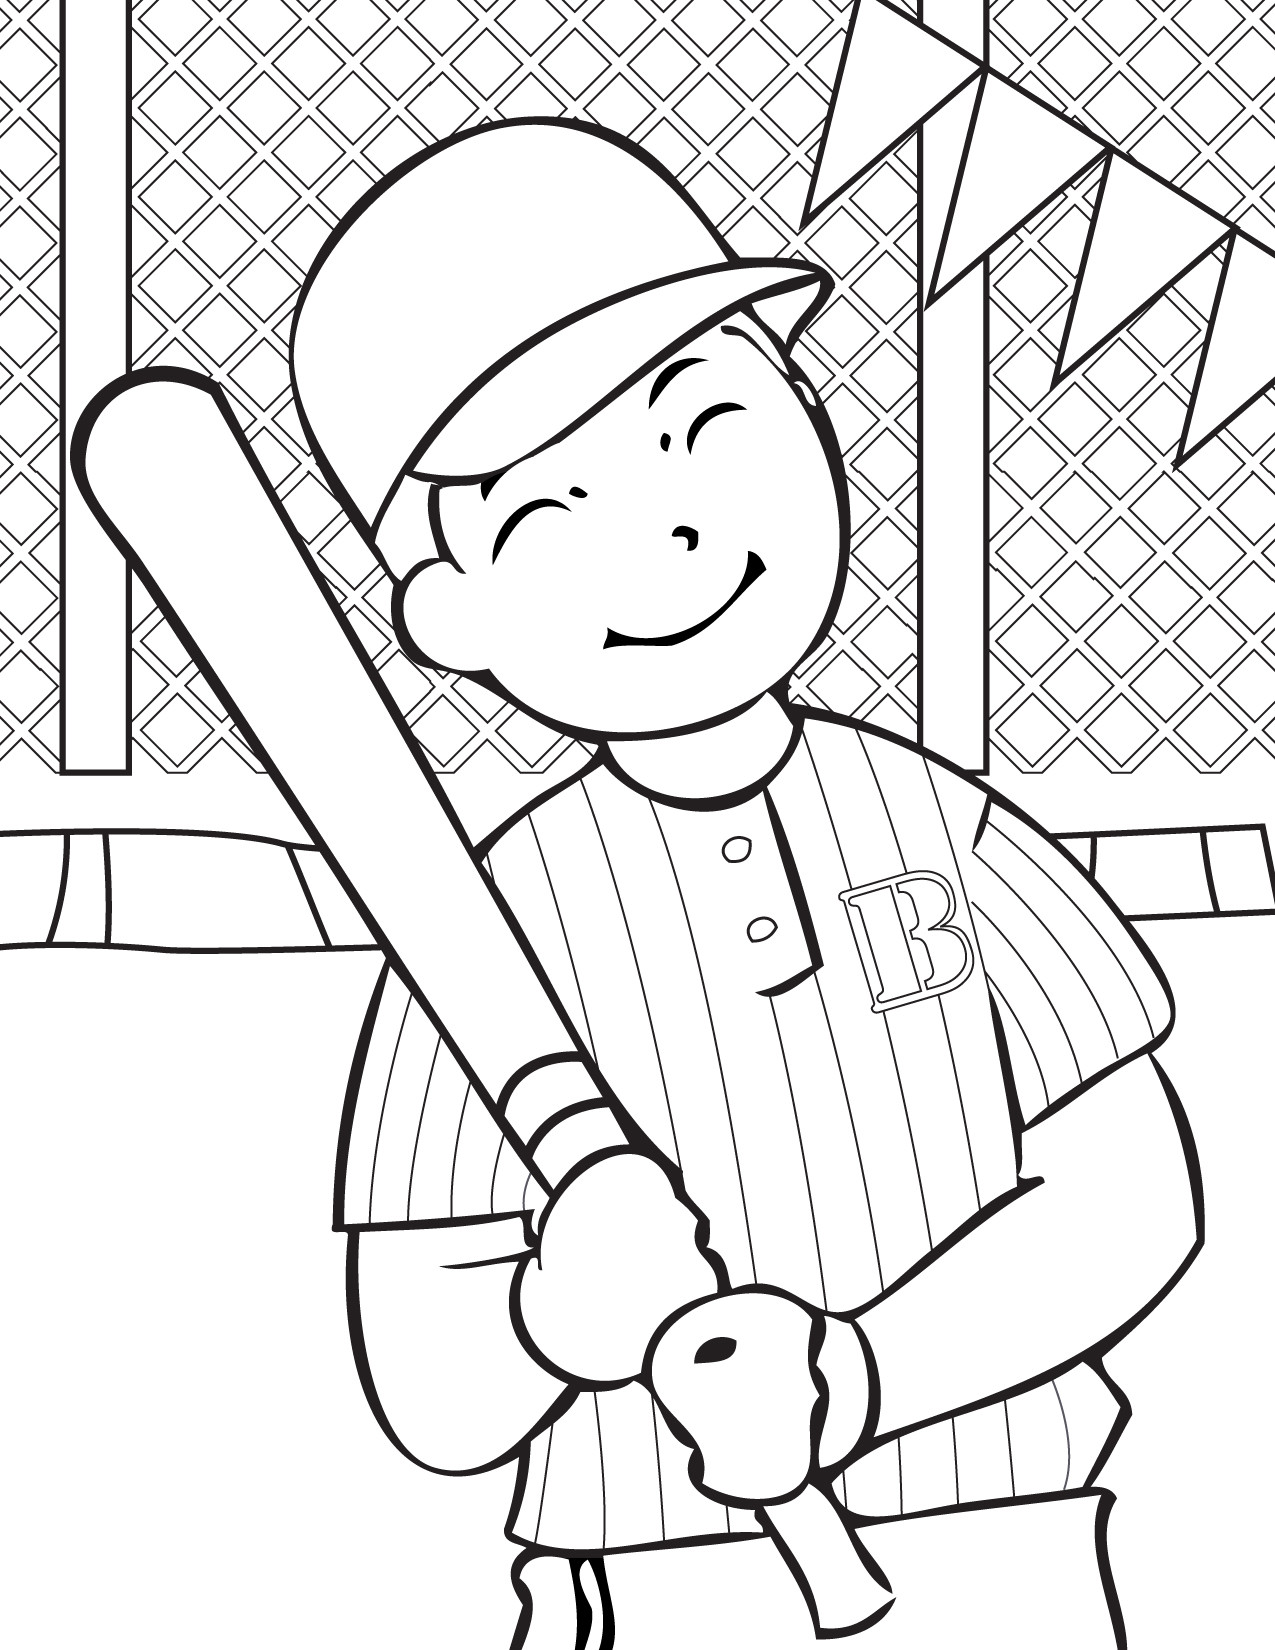 Printable Coloring Books For Kids
 Free Printable Baseball Coloring Pages for Kids Best